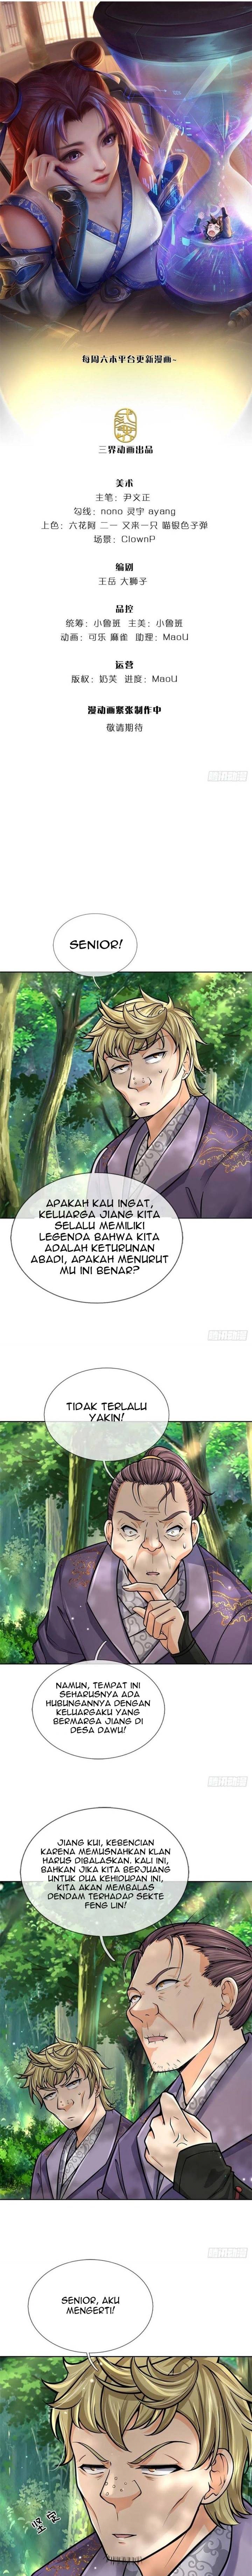 The Way of Domination Chapter 98